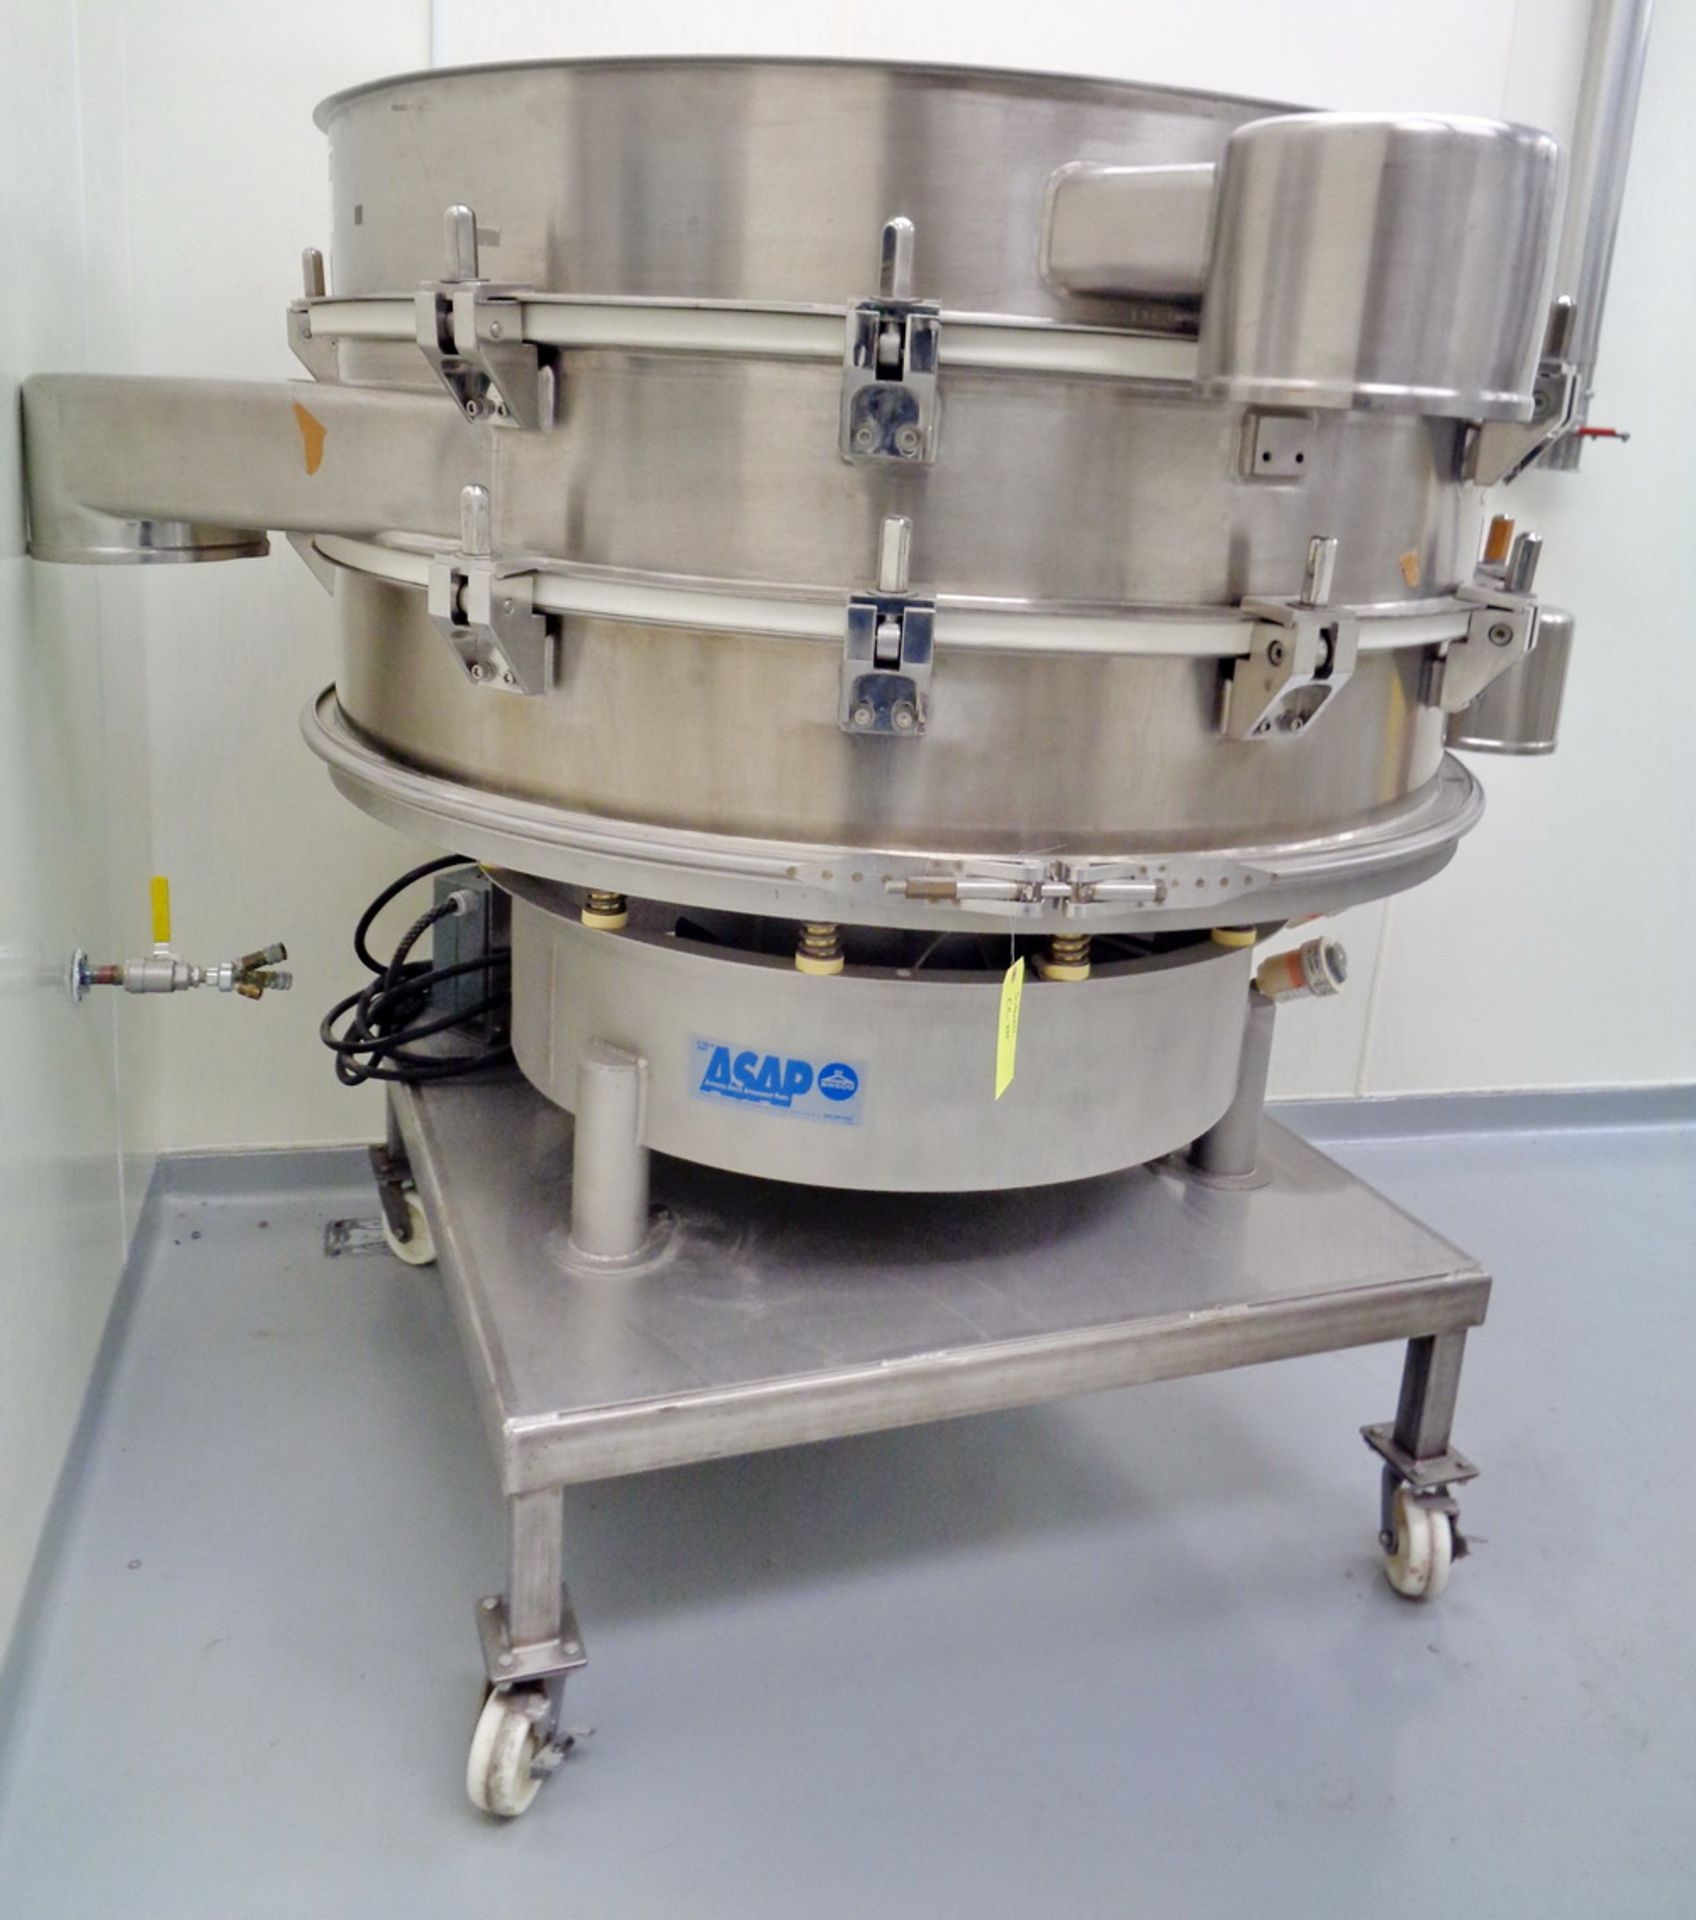 Sweco Stainless Steel 60" Sifter, Model SS60Y88A3P4SASDTLWC, S/N 323718-A05/06 - Image 2 of 8